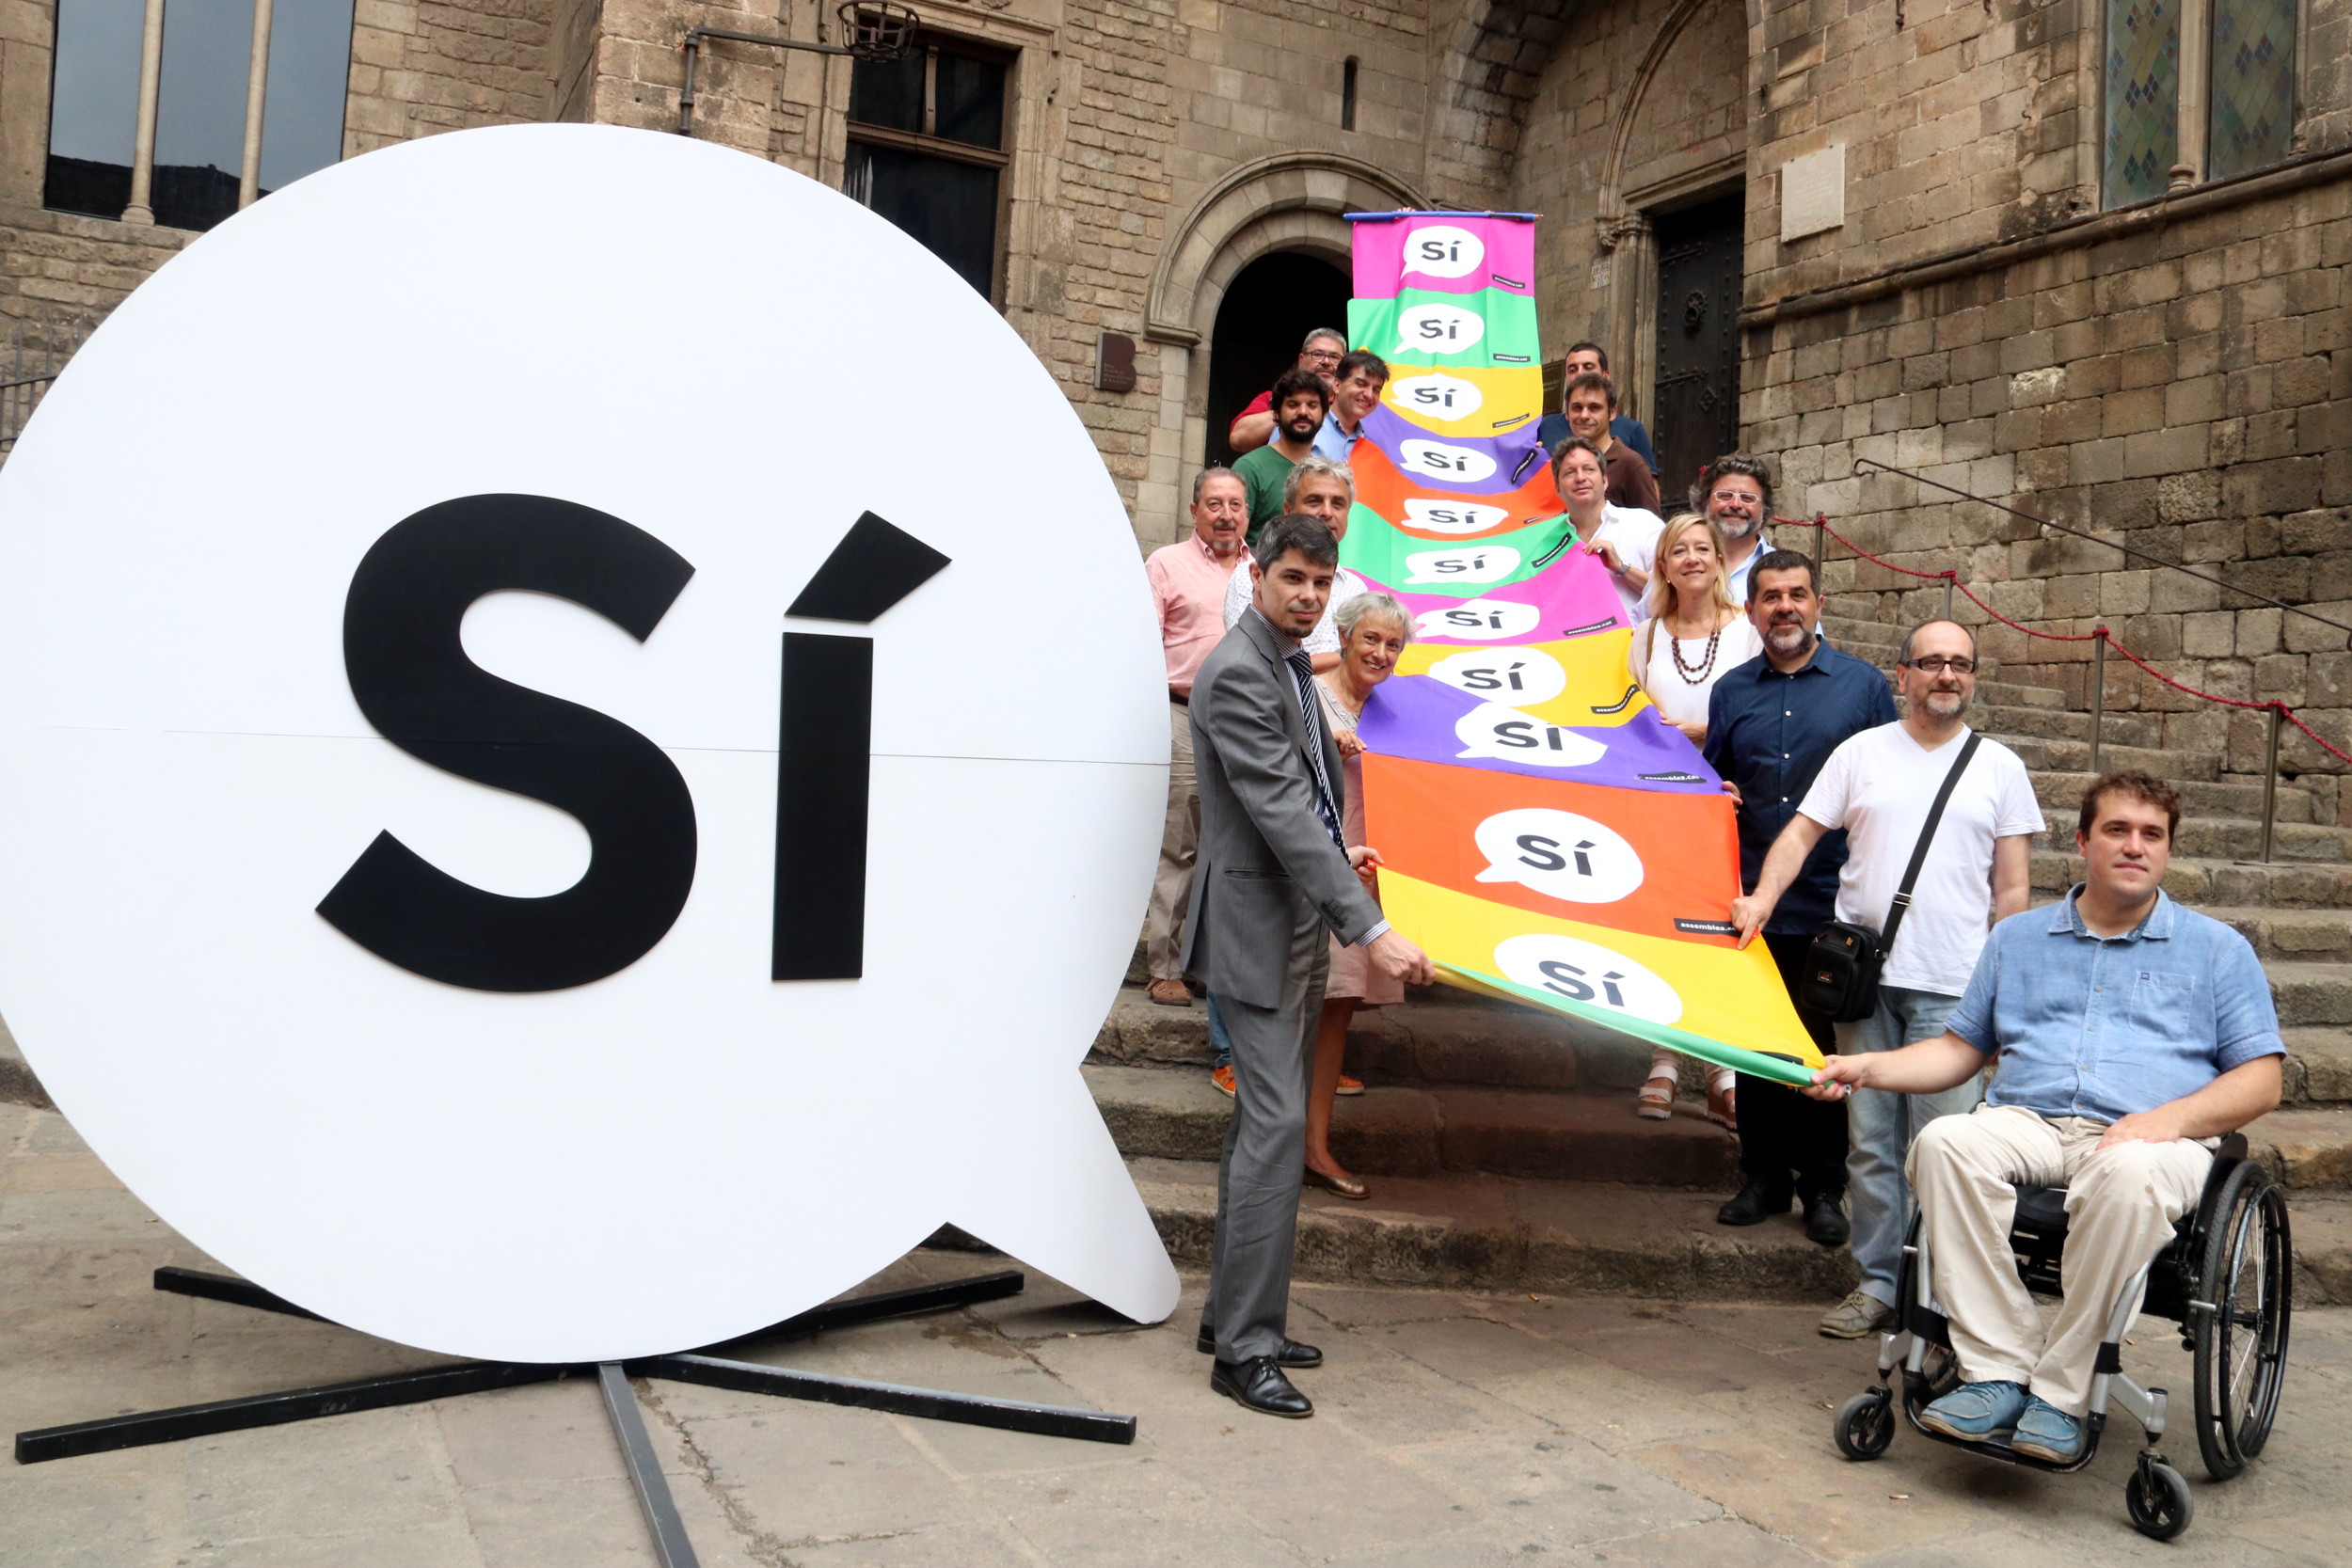 Referendum ‘yes’ vote campaign representatives (by ACN)